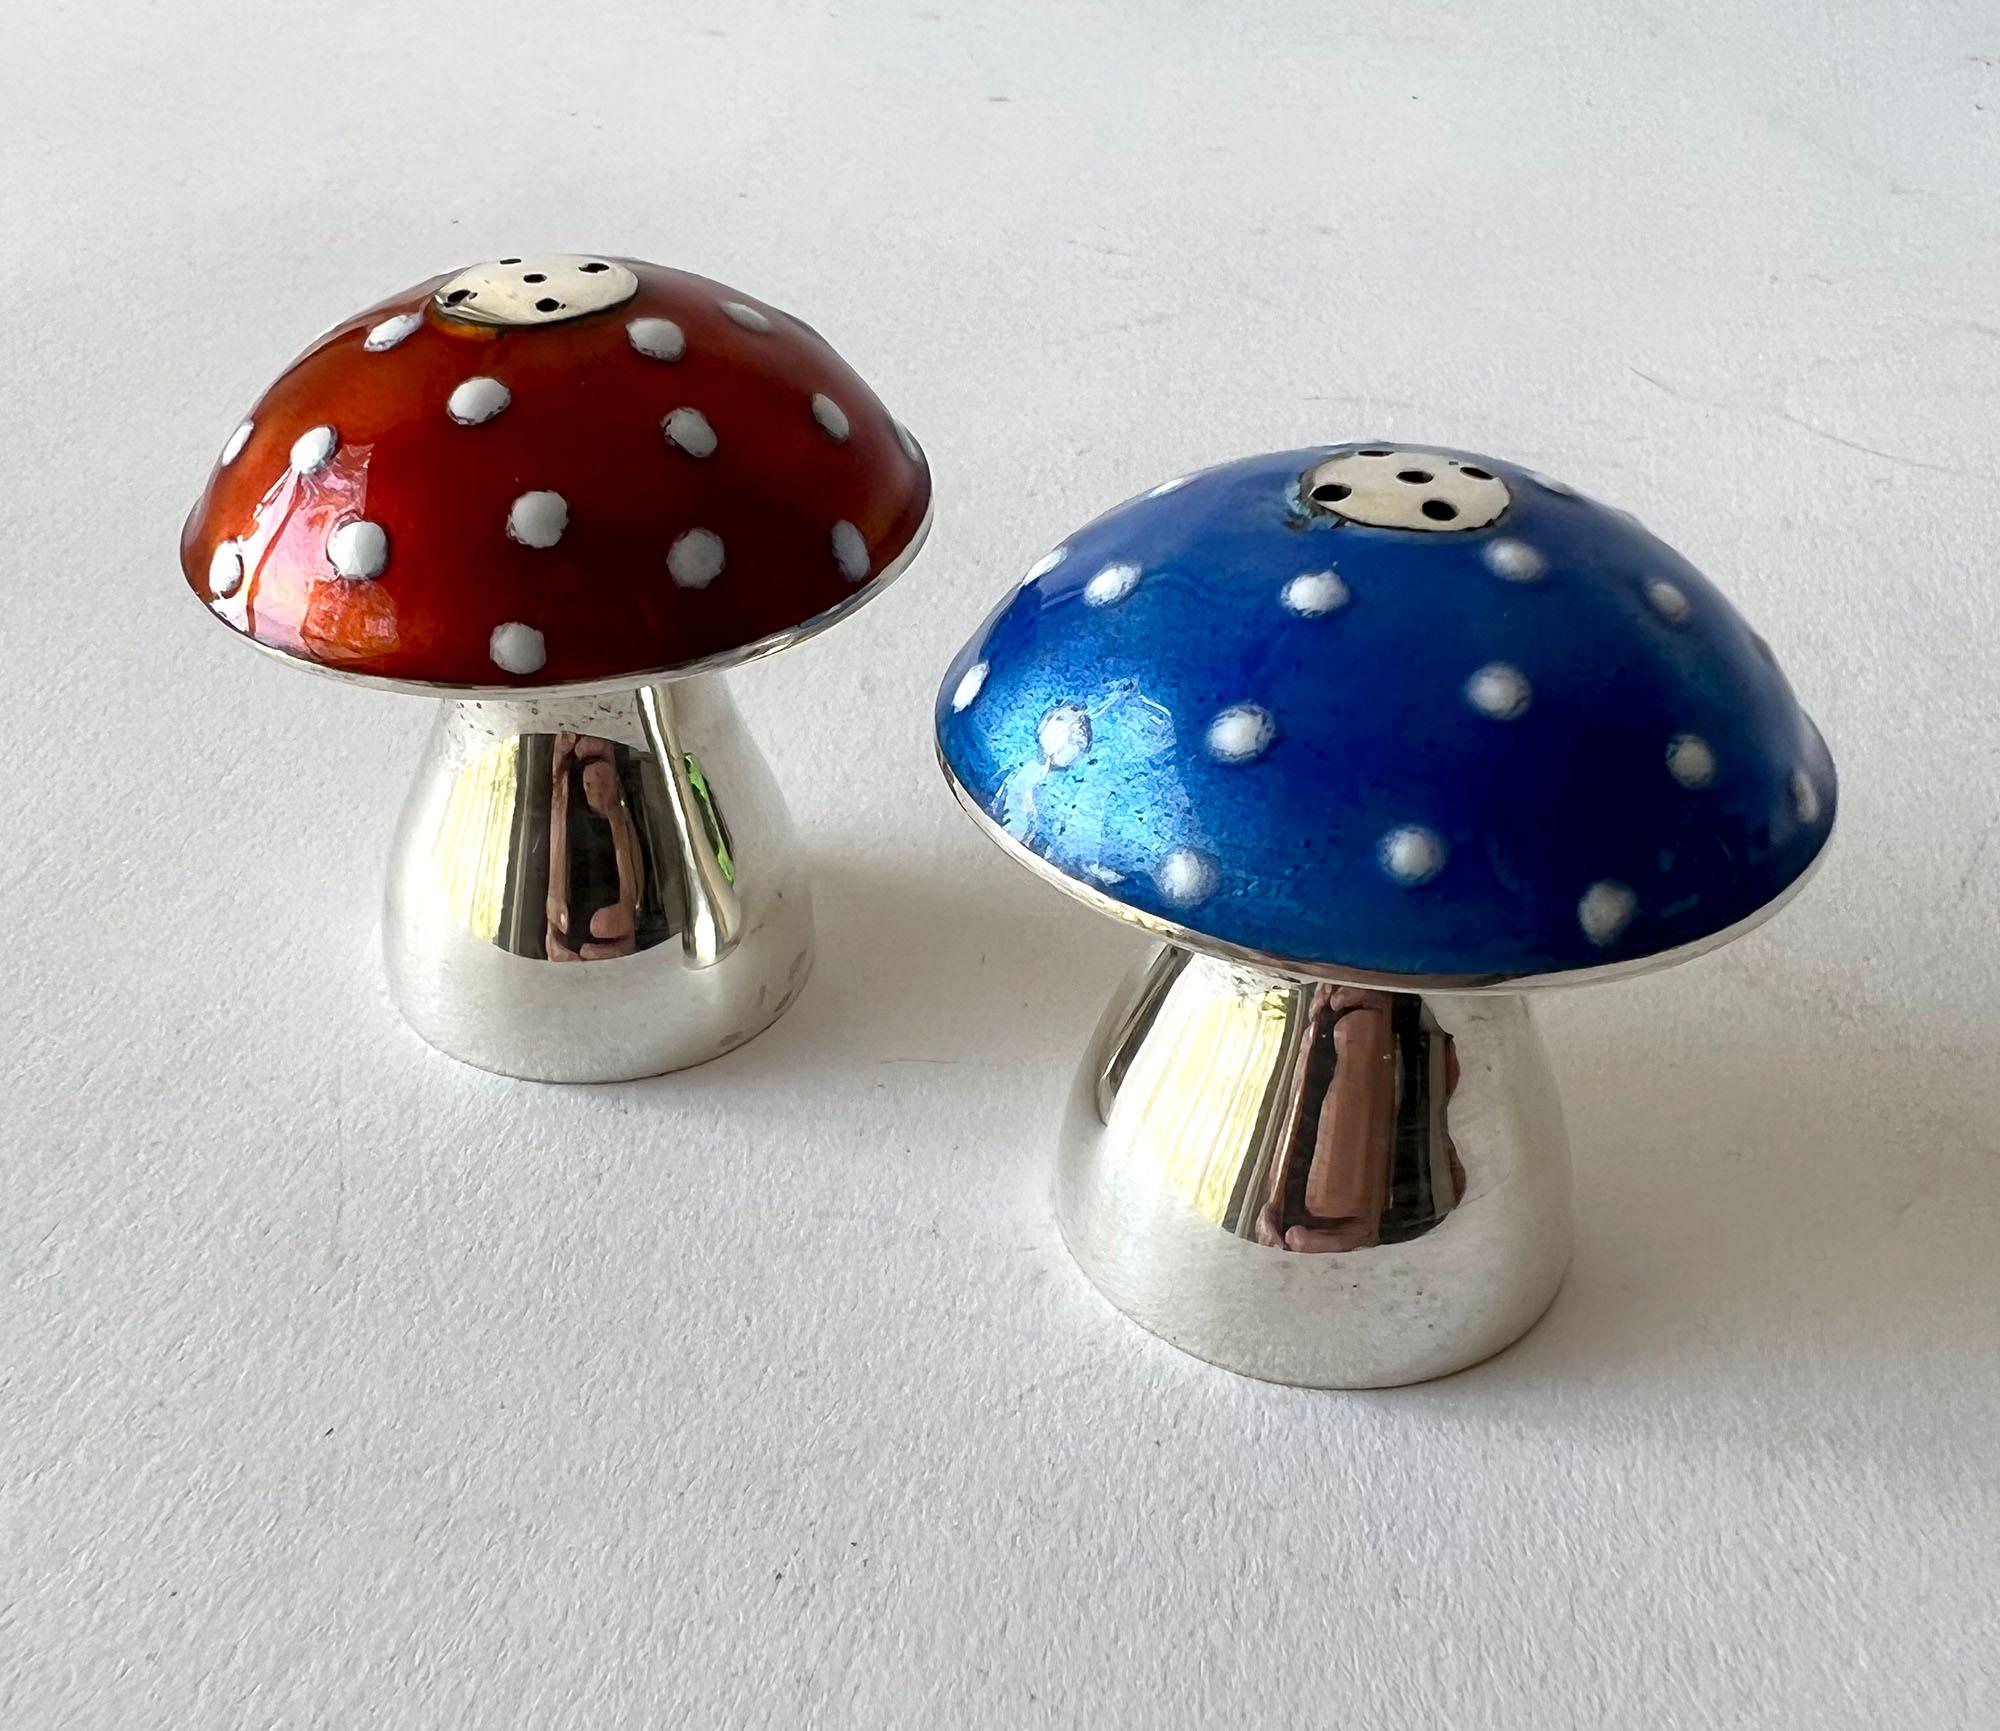 Mexican modern sterling silver and enamel mushroom salt and pepper shakers, unknown maker. Mushrooms measure 2